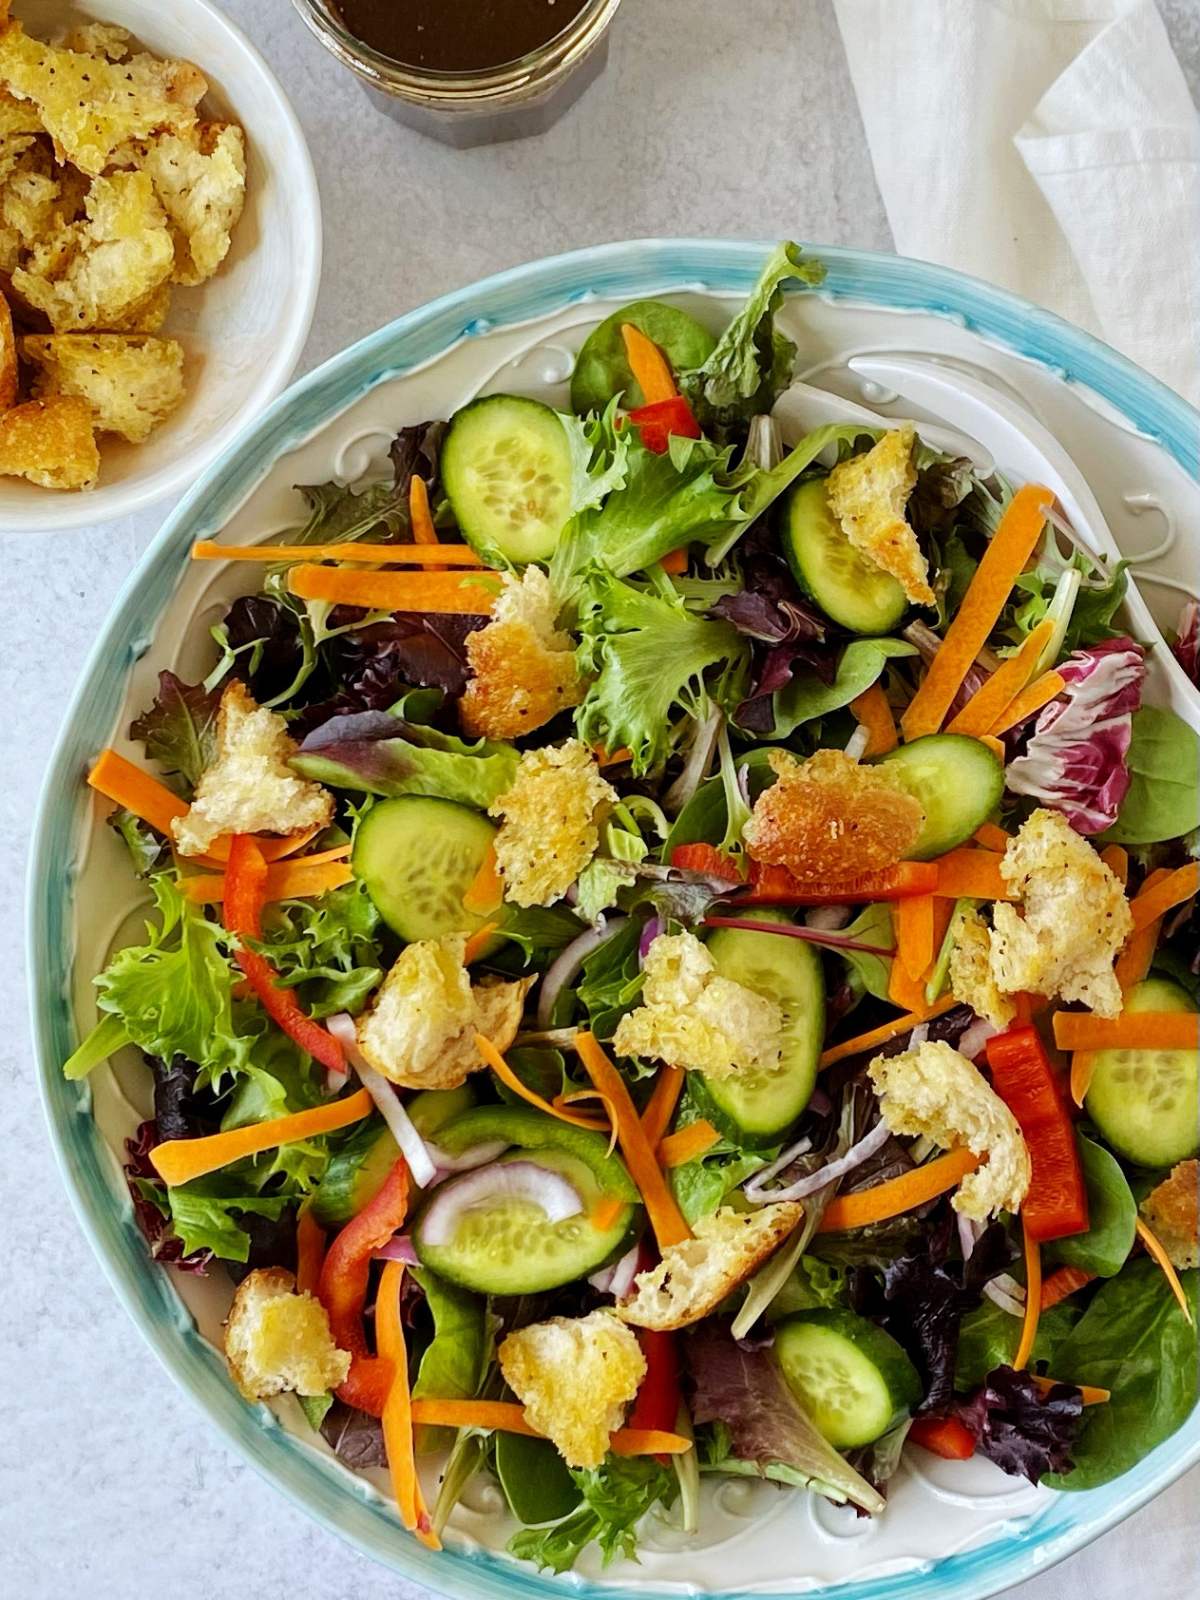 serving bowl of house salad with croutons and dressing on the side.